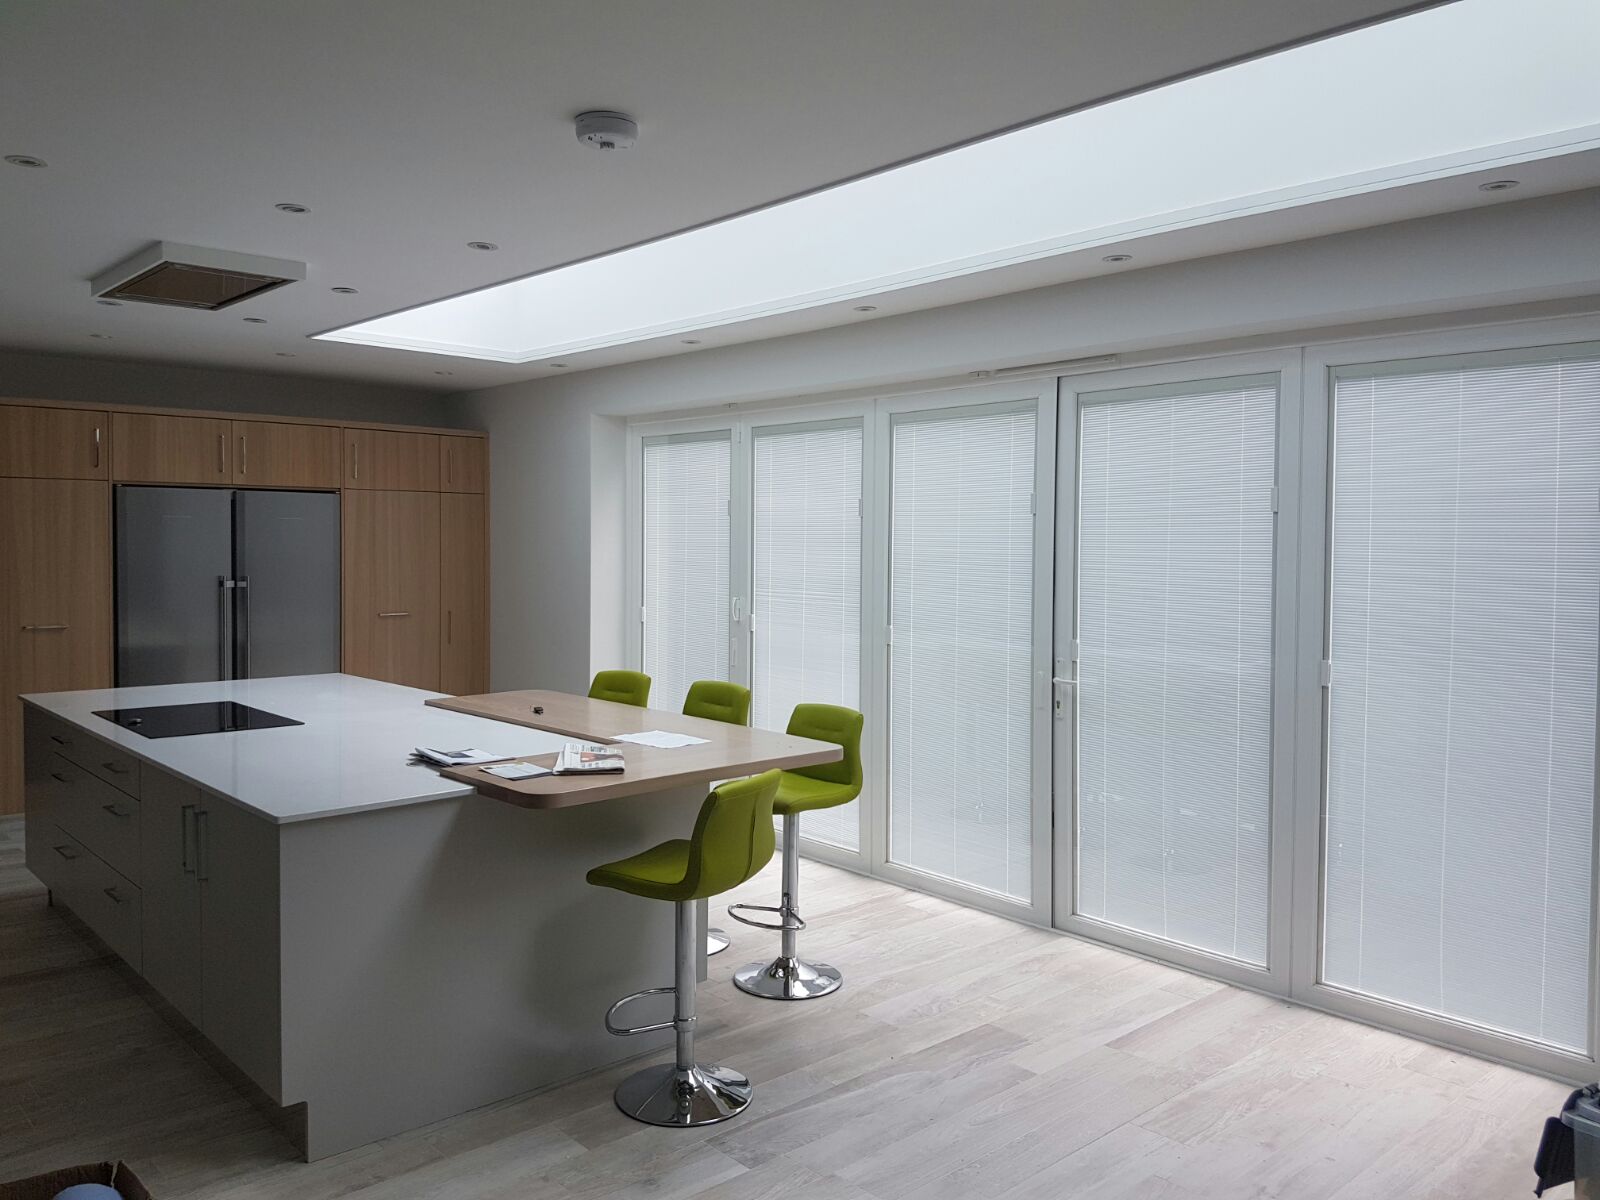 View our Magnetically Operated Blinds